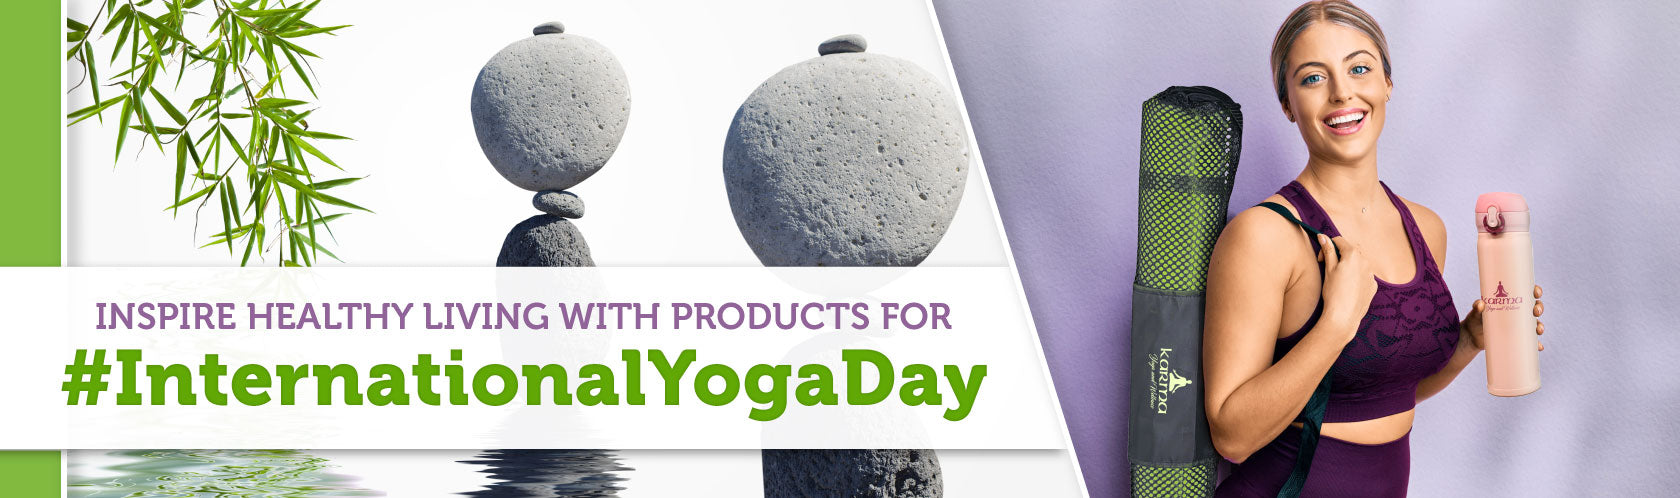 Inspire Healthy Living with Products for #InternationalYogaDay ...